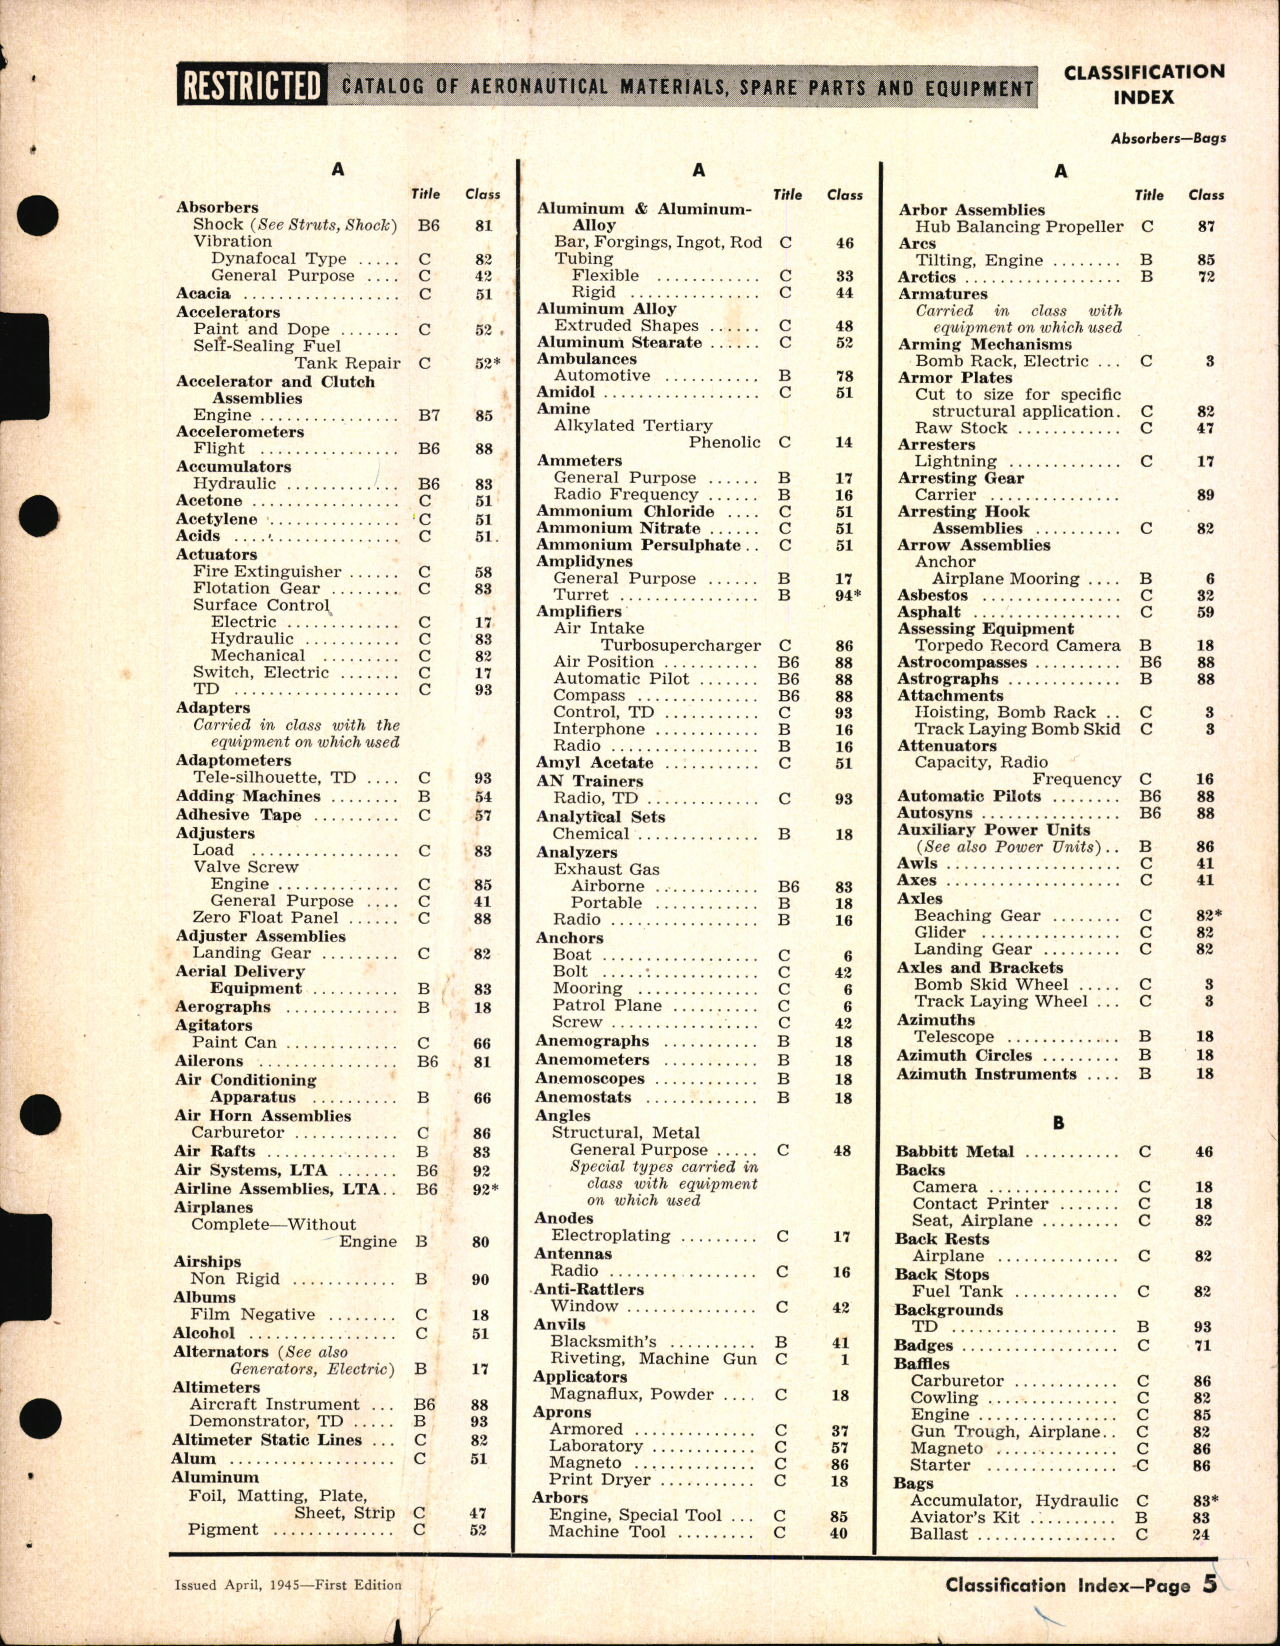 Sample page 5 from AirCorps Library document: Classification Index of Naval Aeronautical Materials 